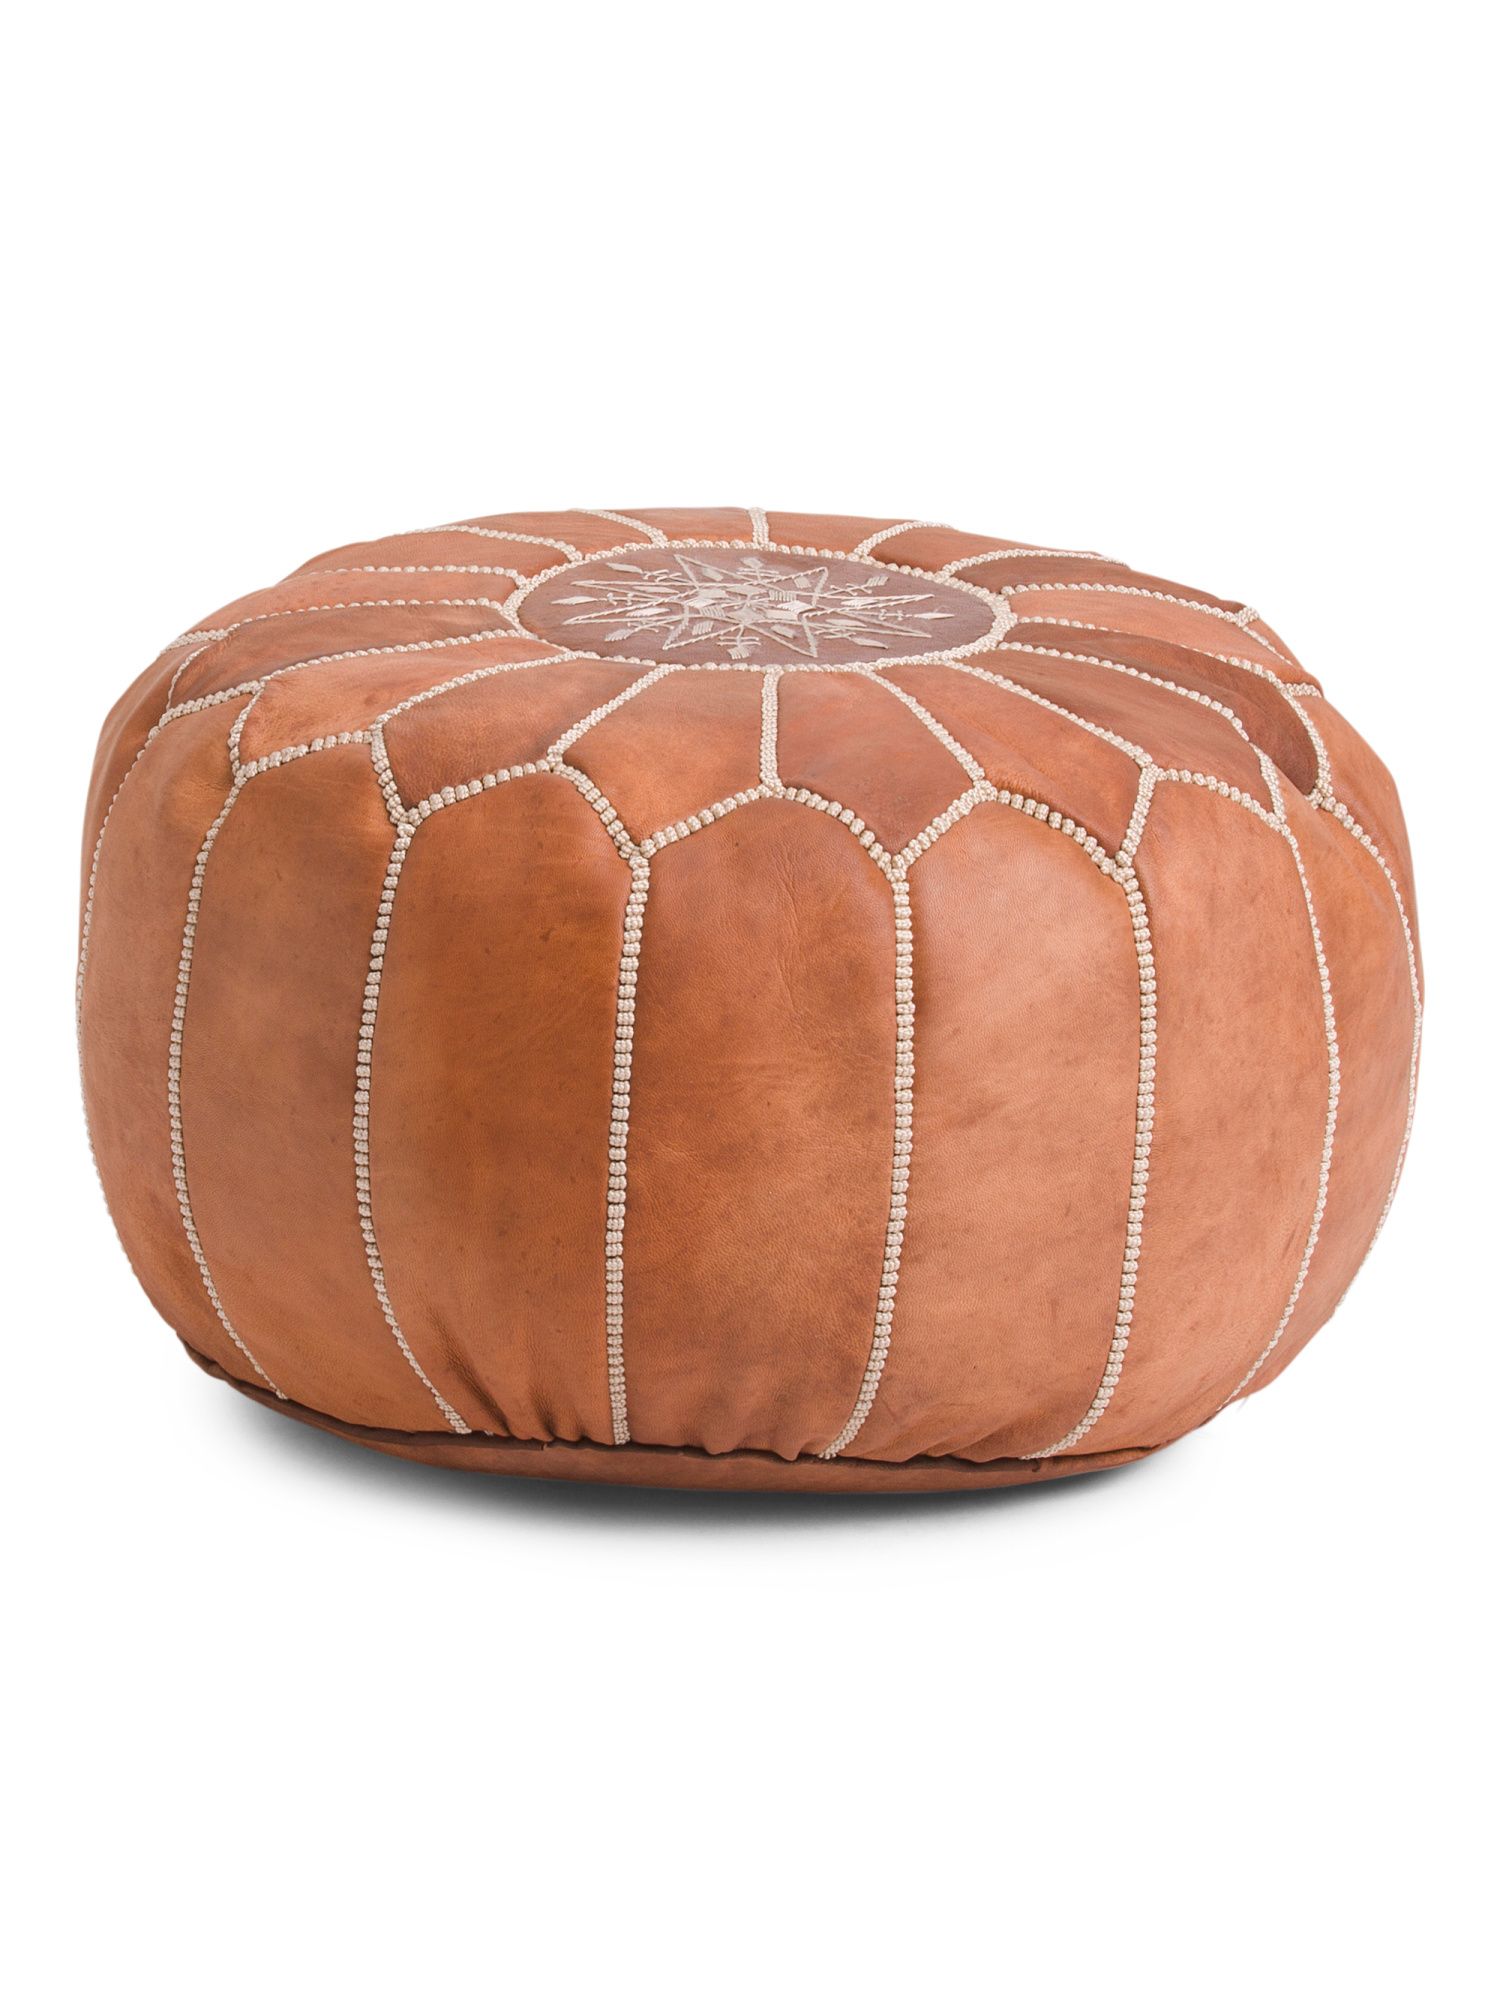 Made In Morocco Hand Stitched Leather Pouf - Home - T.J.Maxx | TJ Maxx